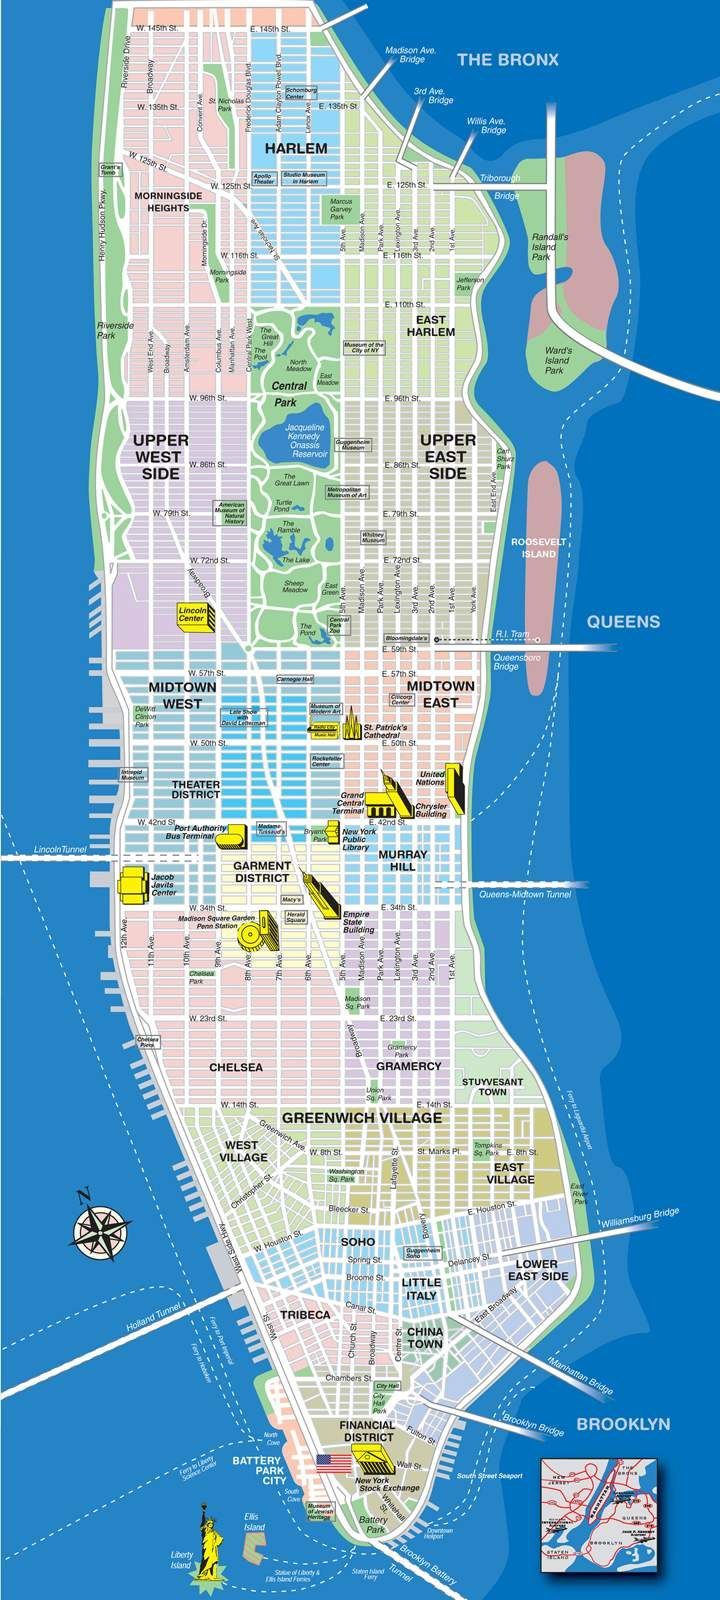 High-Resolution Map Of Manhattan For Print Or Download | Usa Travel - Manhattan Road Map Printable